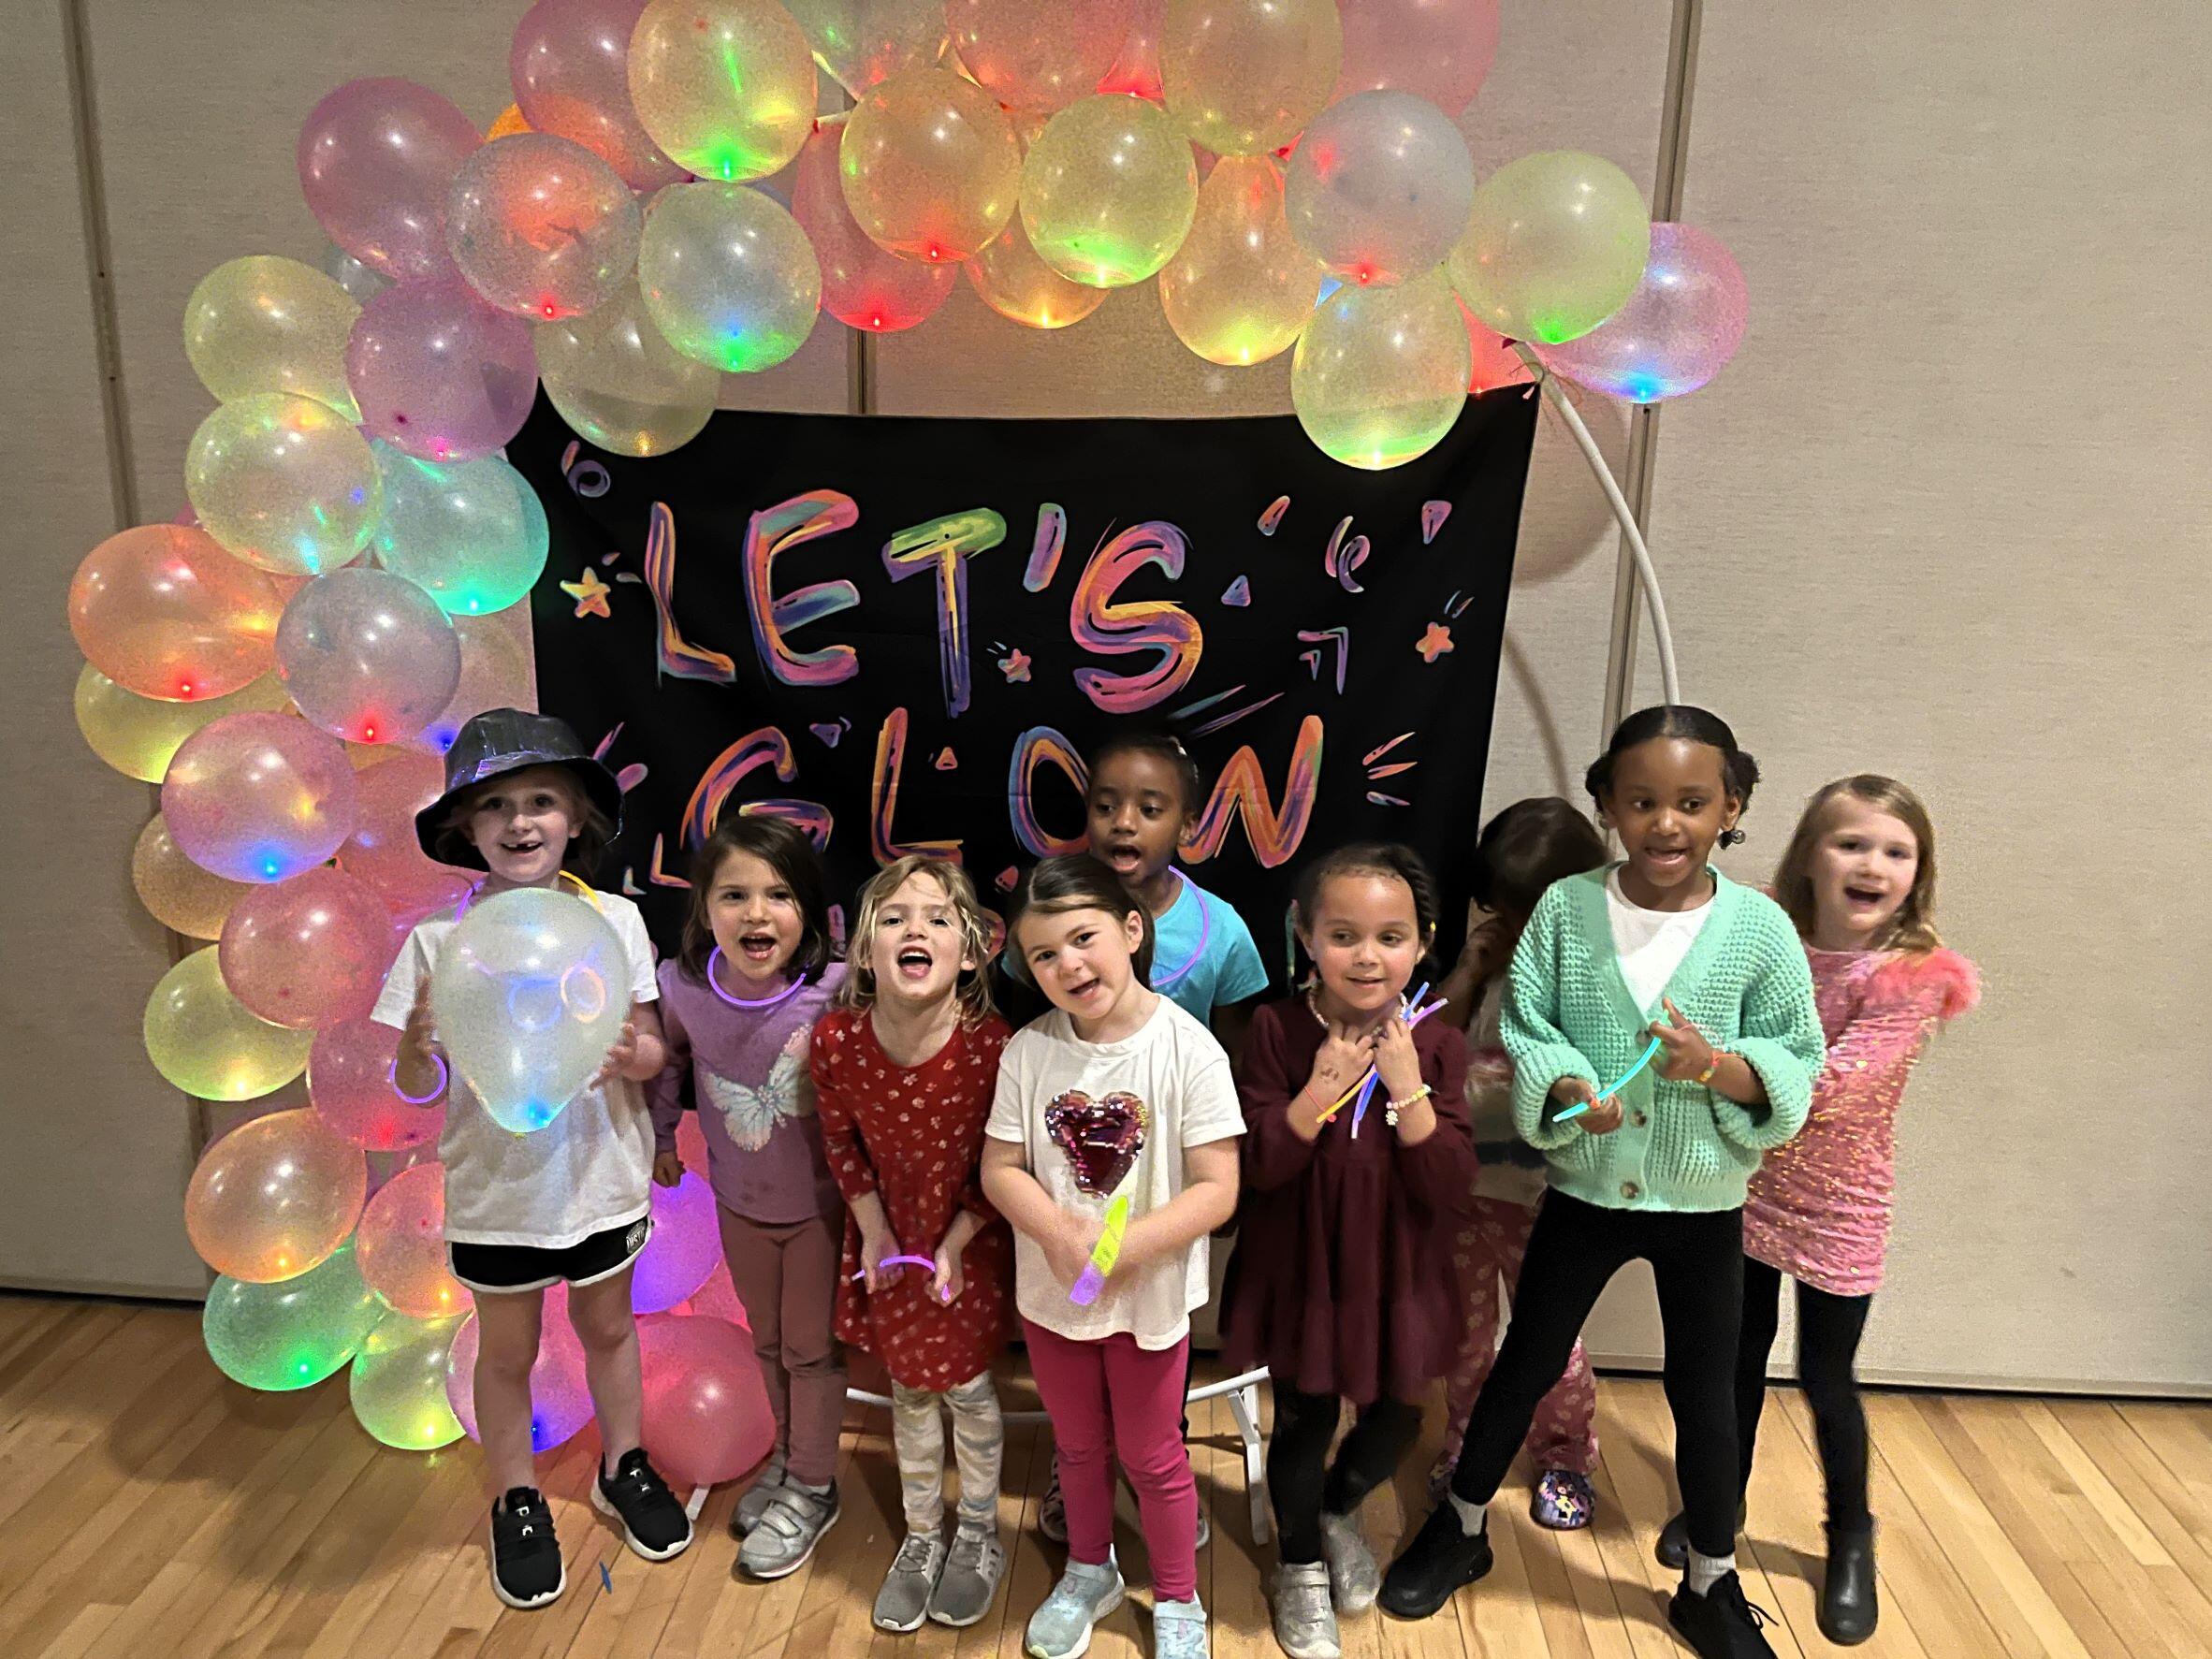 A group of 9 kids standing in front of a sign that says Let's Glow. There is a balloon arch behind them. The balloons are glowing all different colors